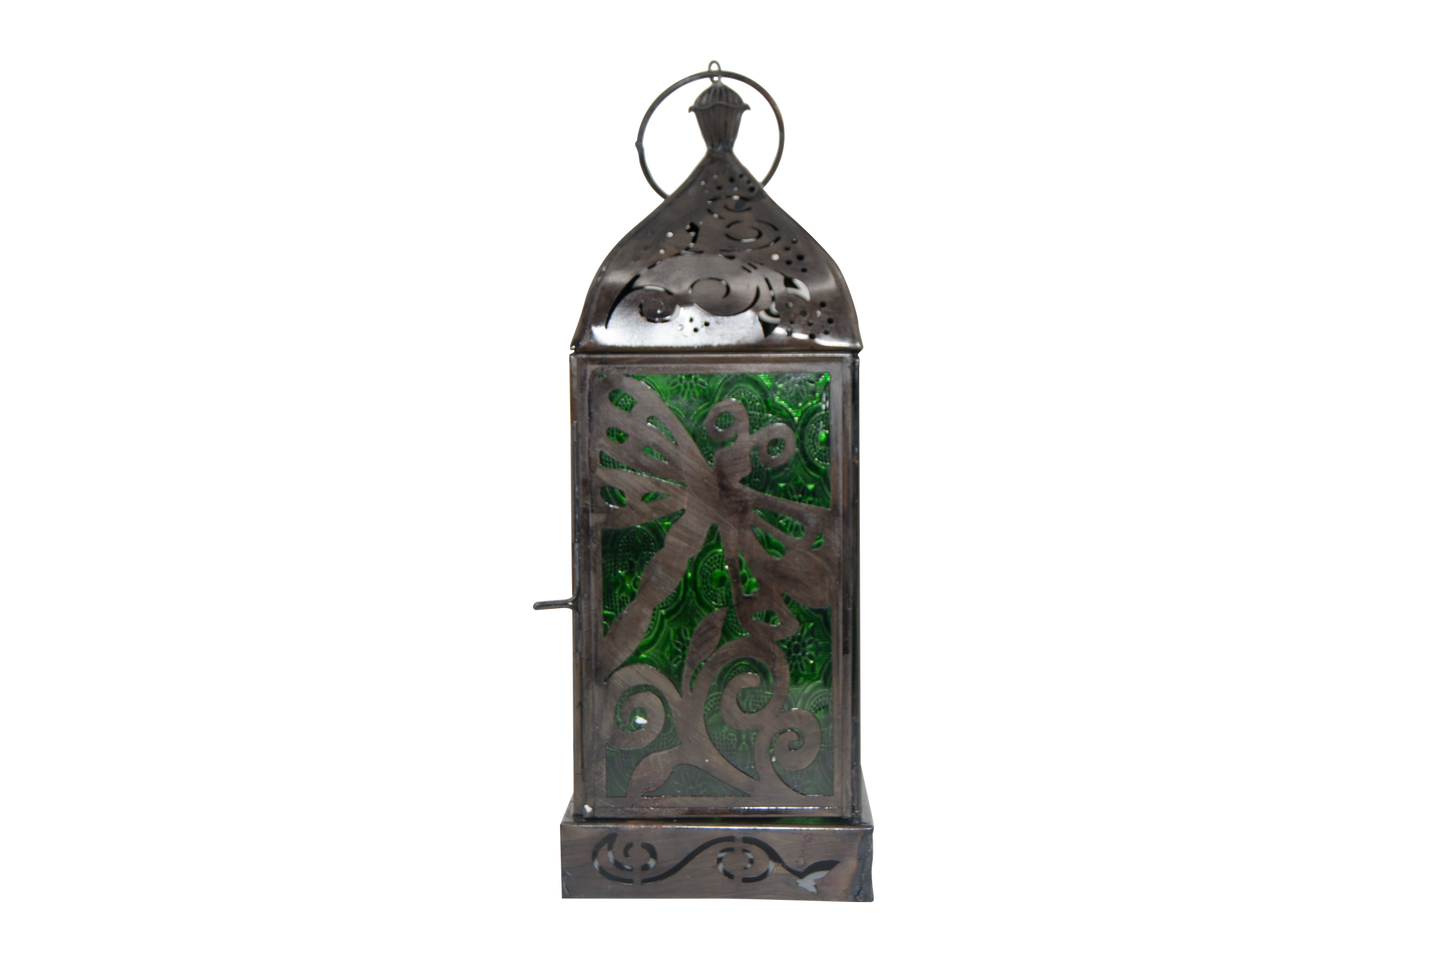 Candle Lantern - Dragonfly, Black Antique with Green Windows 4" x 11"